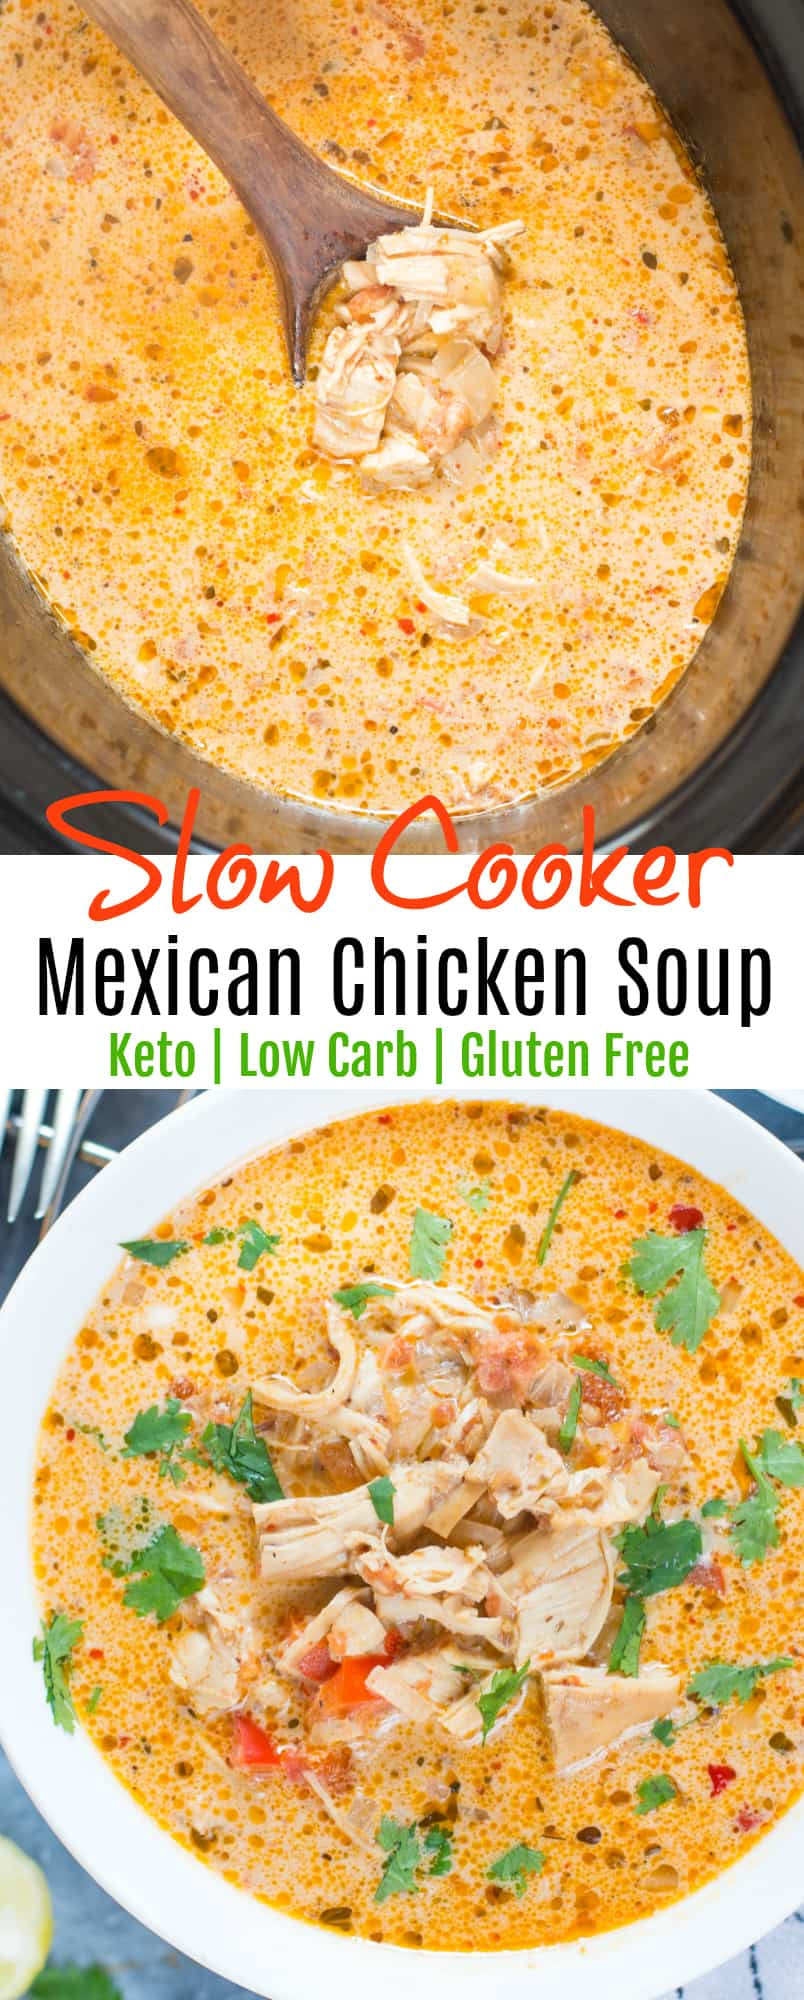 Mexican Keto Recipes Crockpot
 SLOW COOKER MEXICAN CHICKEN SOUP The flavours of kitchen